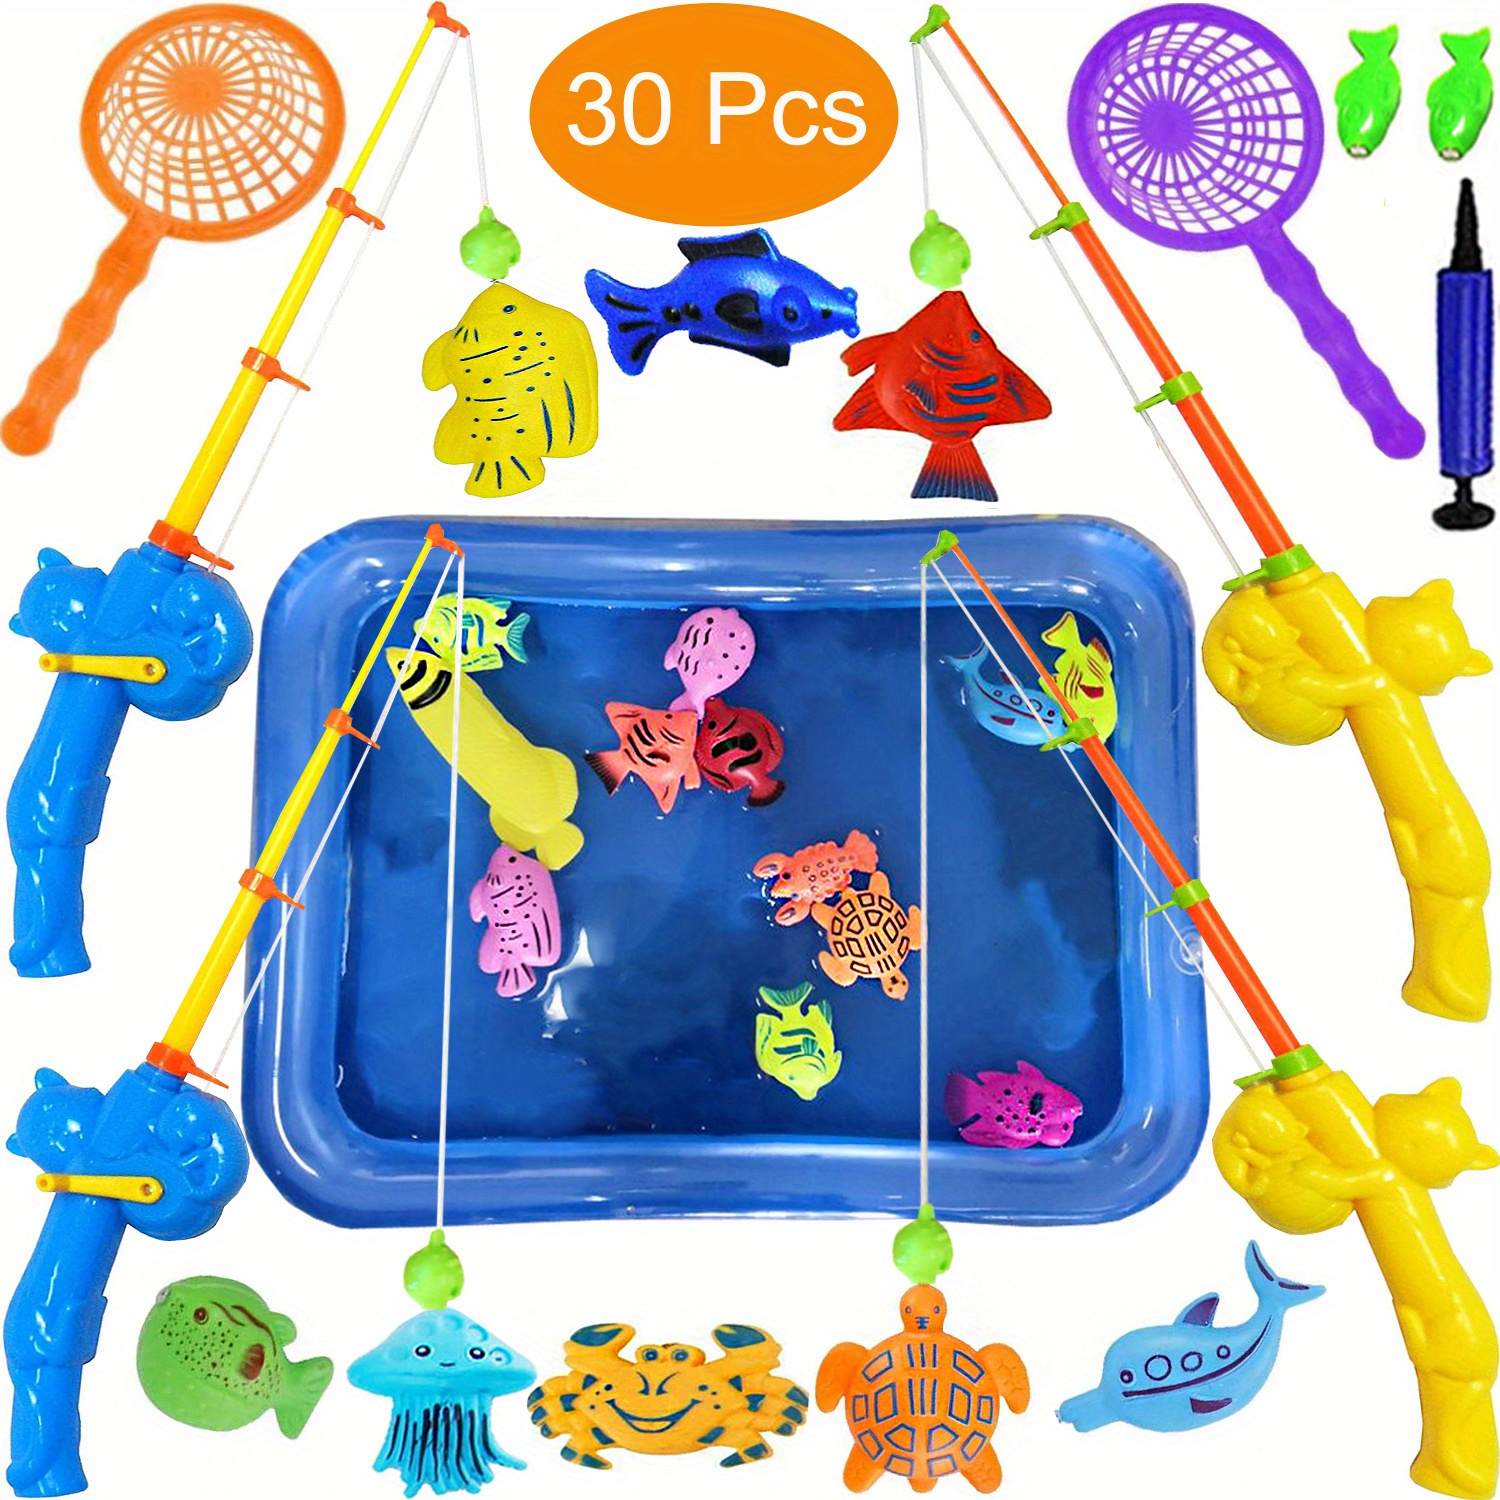 Cheap interactive Game Inflatable Pool Magnetic Fishing Fishing Toys Set  Water Bath Toys 3D Fish Rod Net